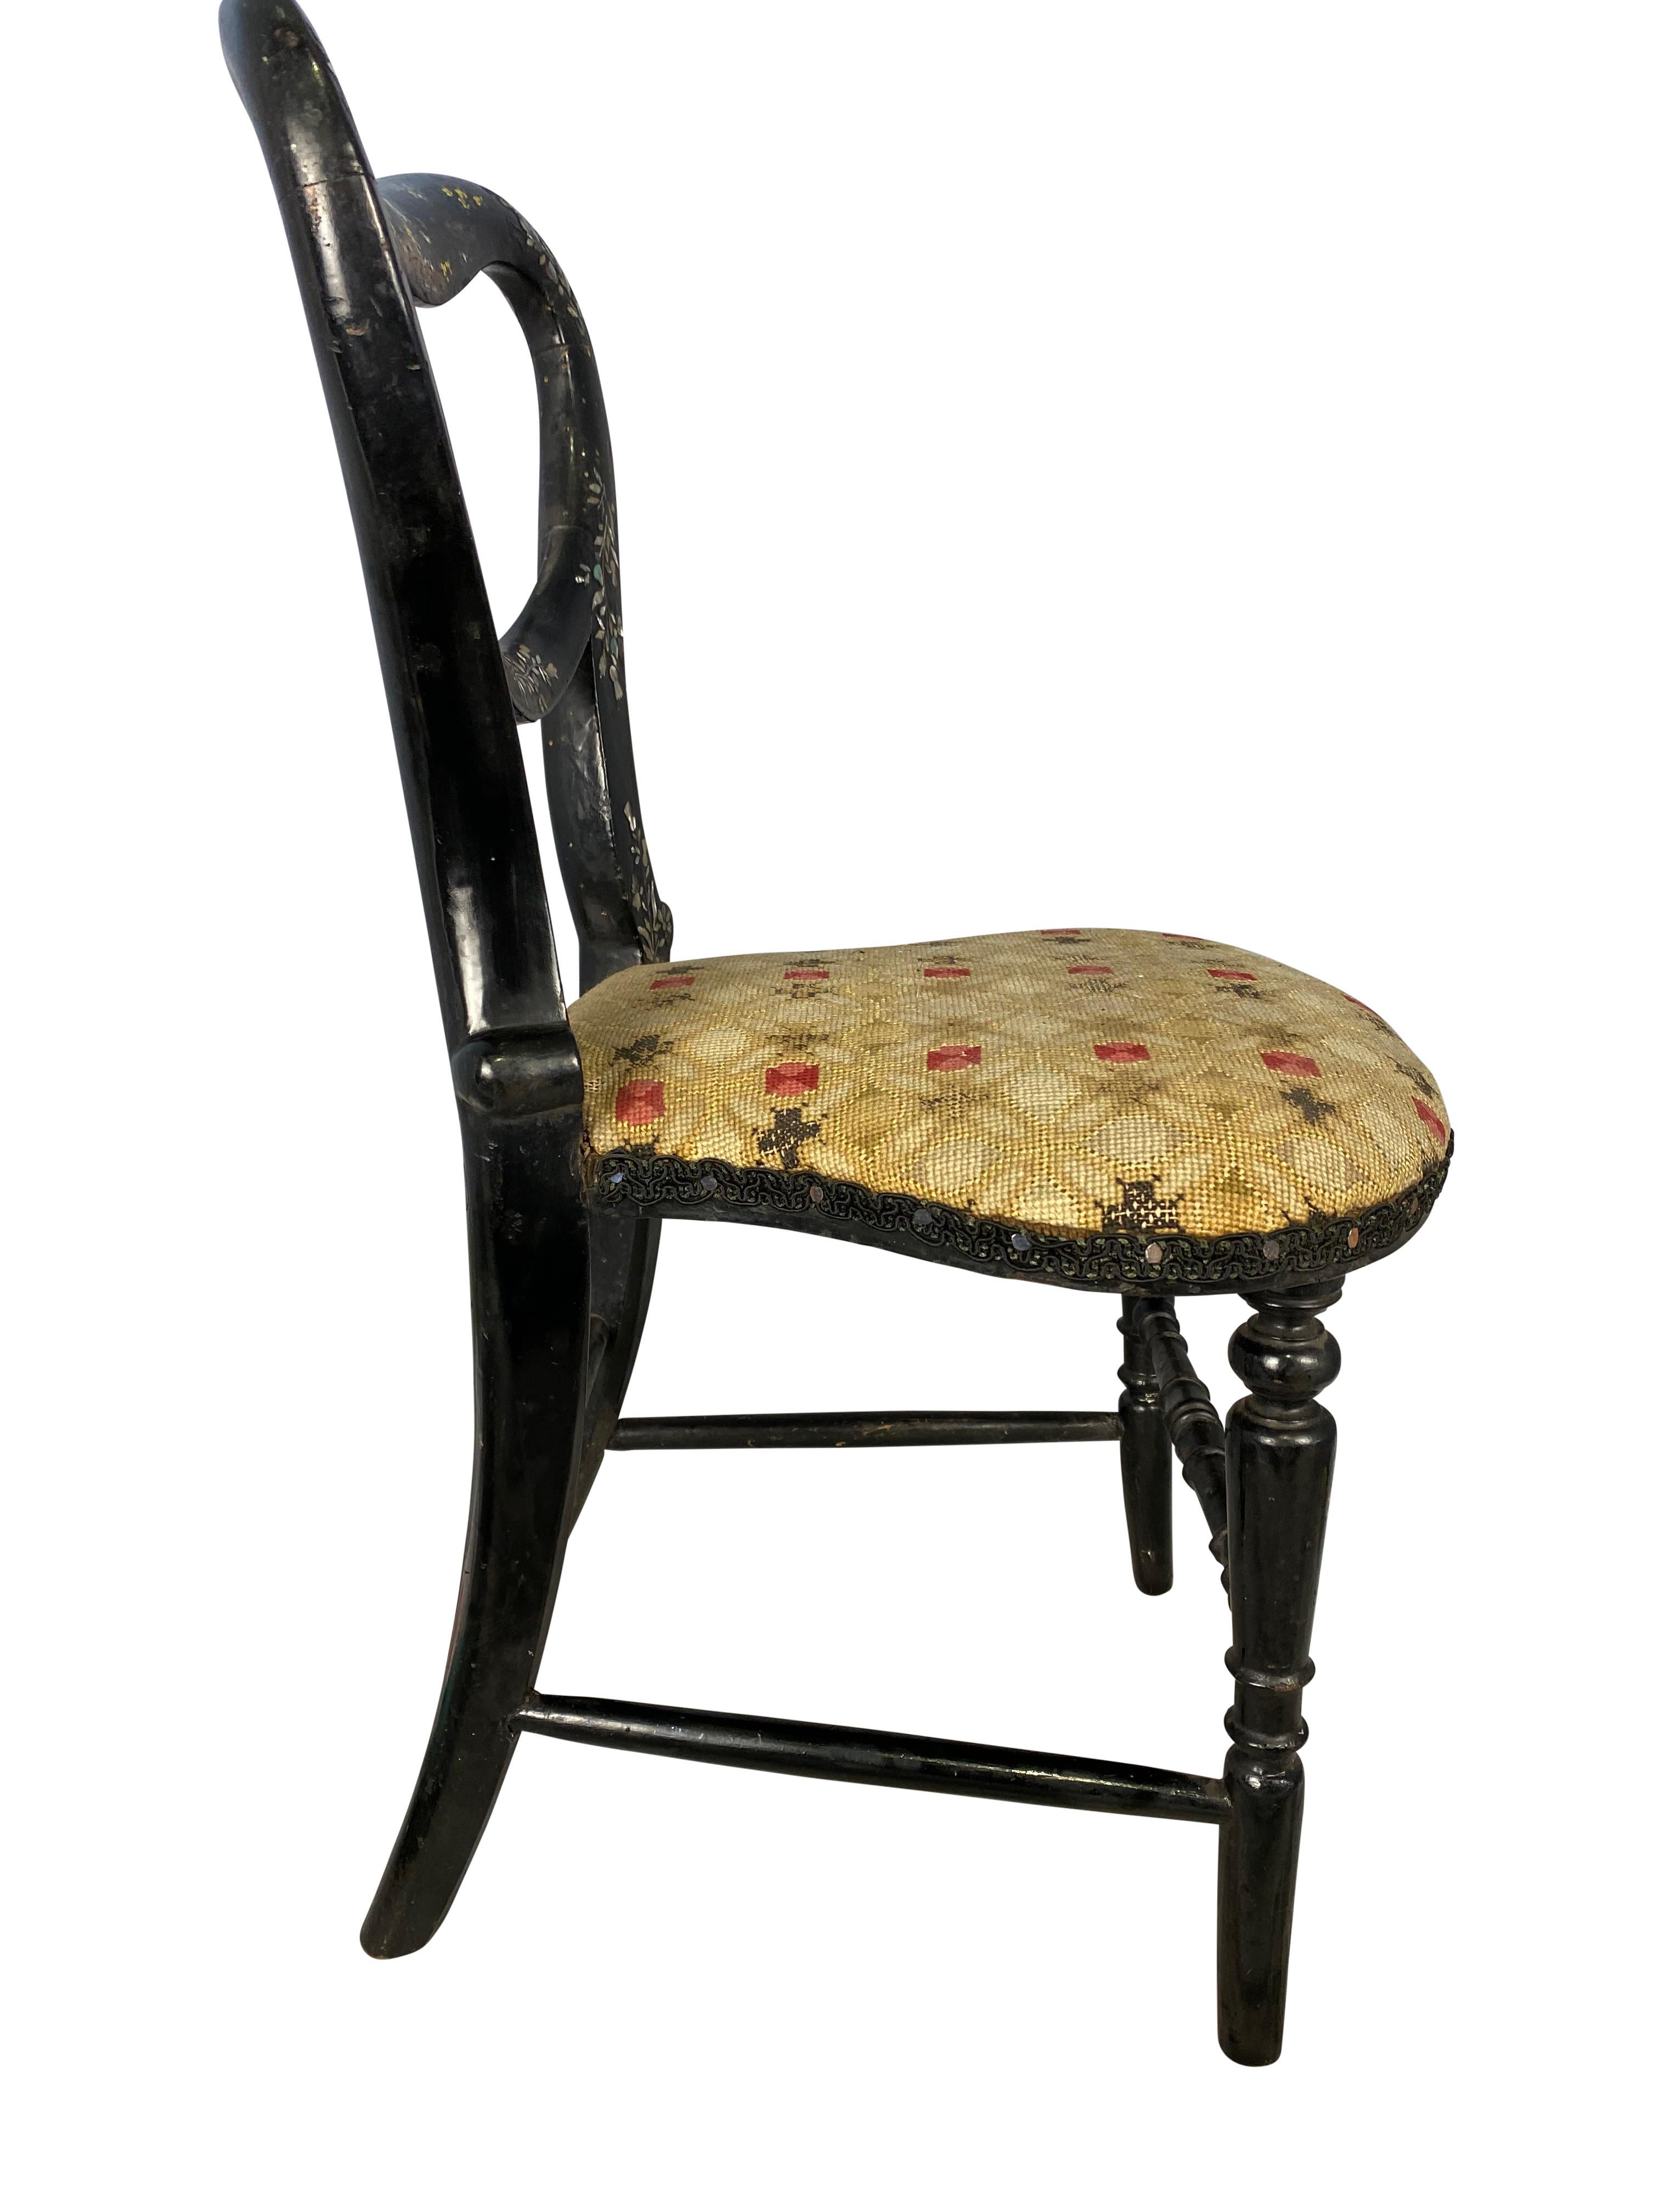 Hand Painted and Mother of Pearl Inlaid Miniature Chair, 19th Century For Sale 8